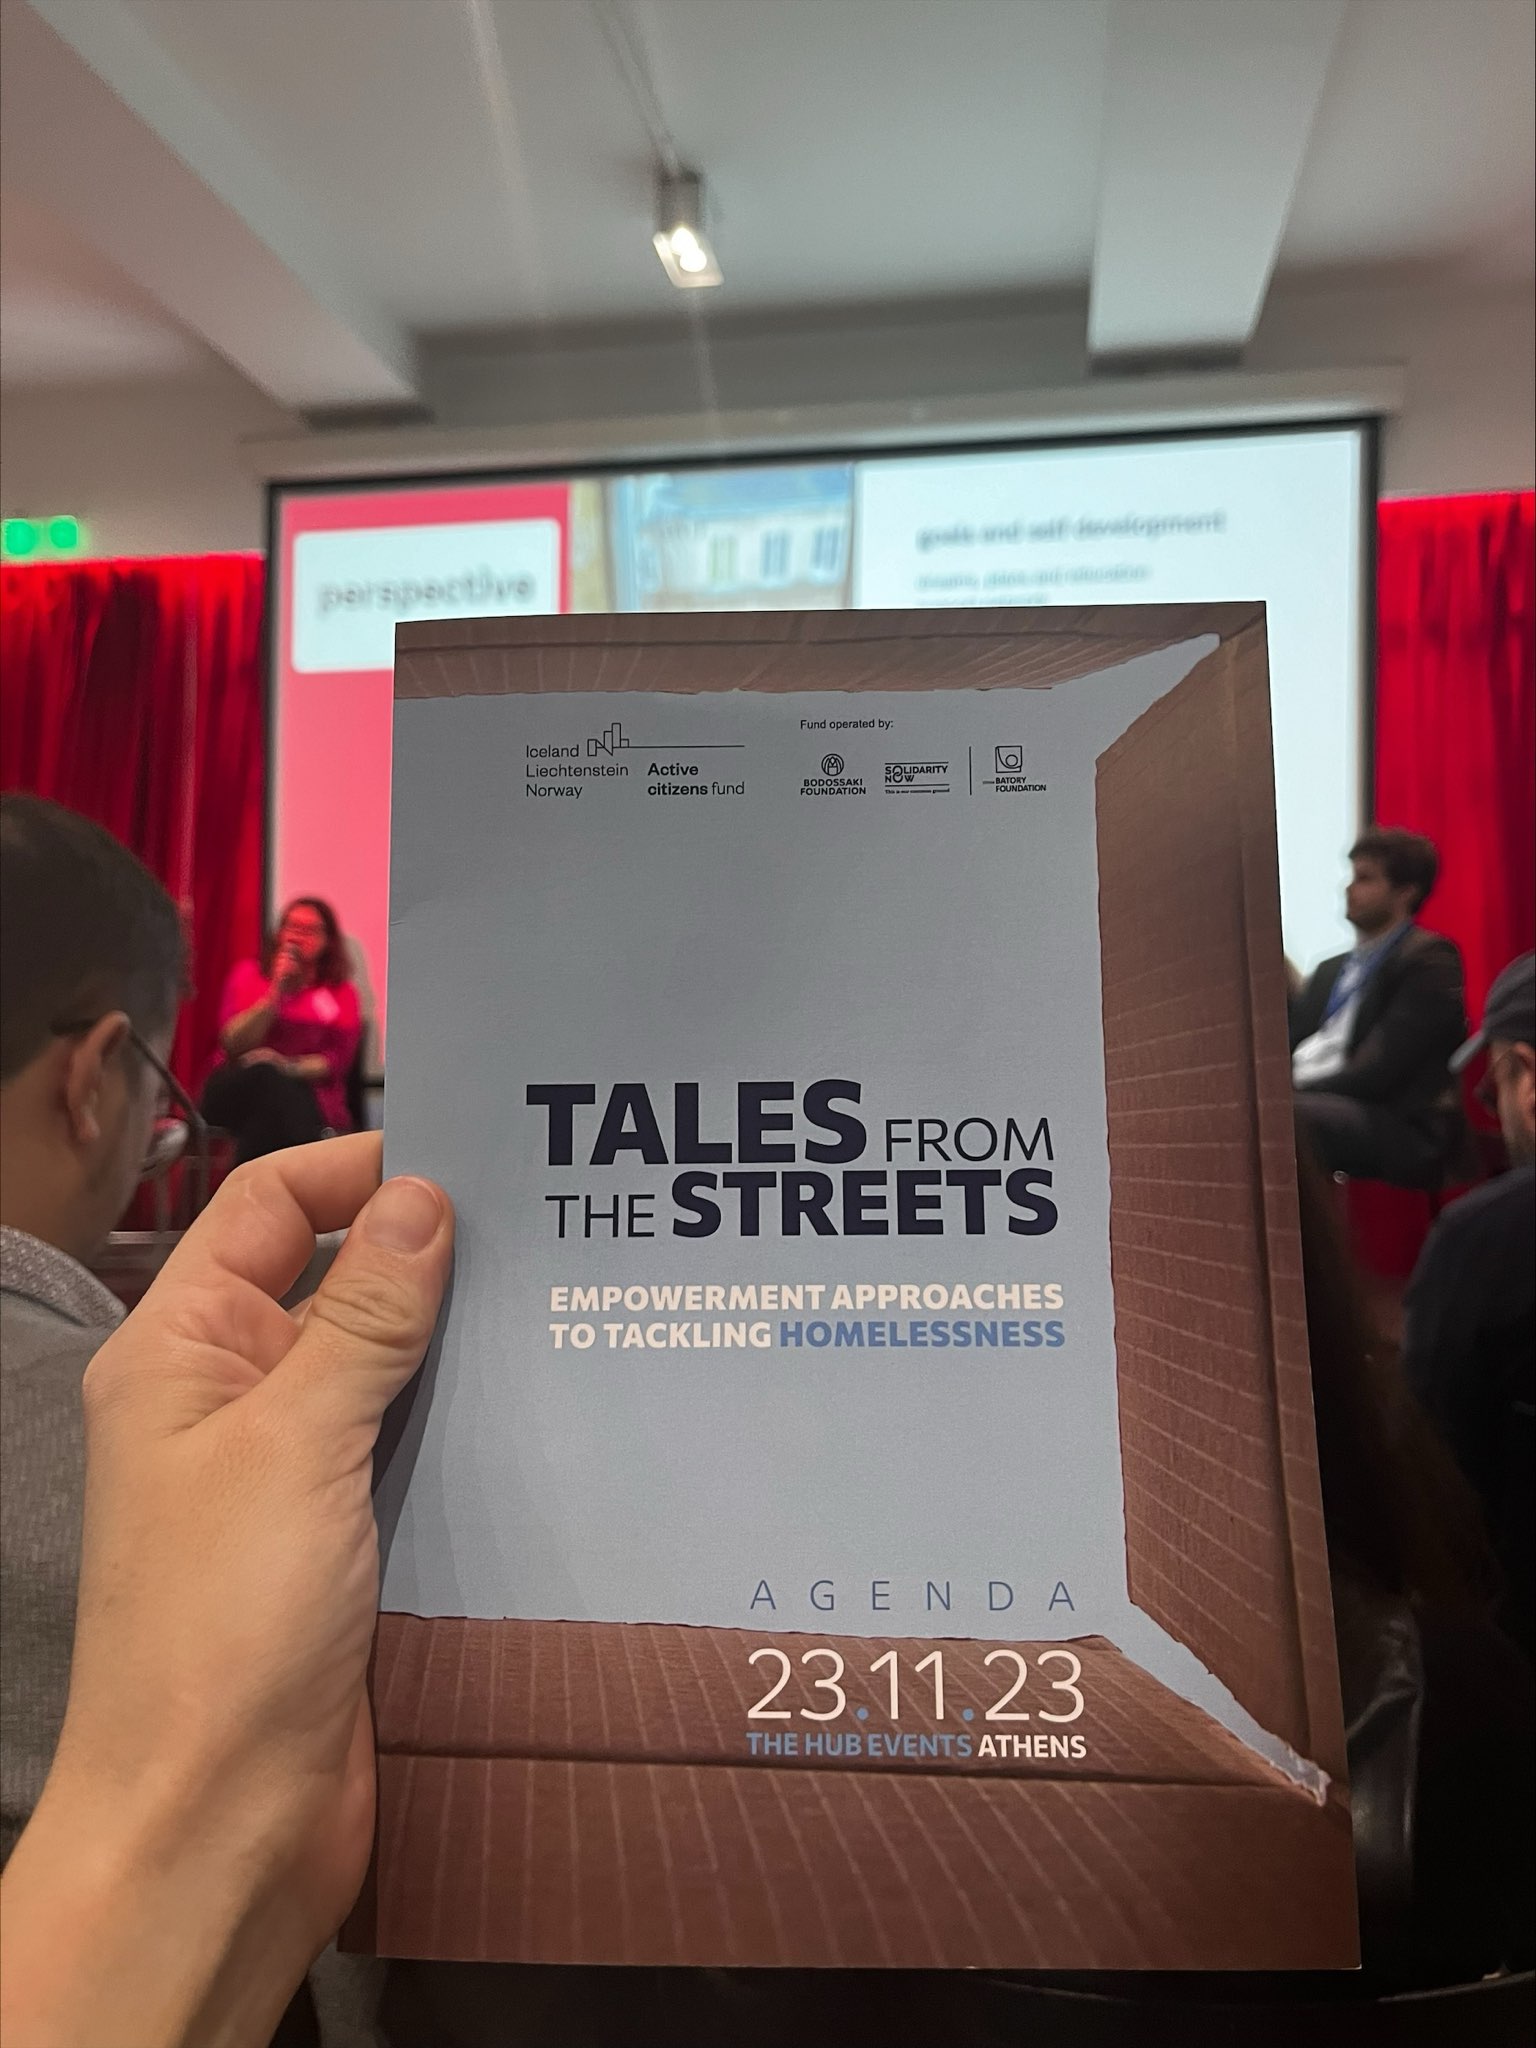 EVENT: tales from the street | Empowerment approaches to tackling homelessness!